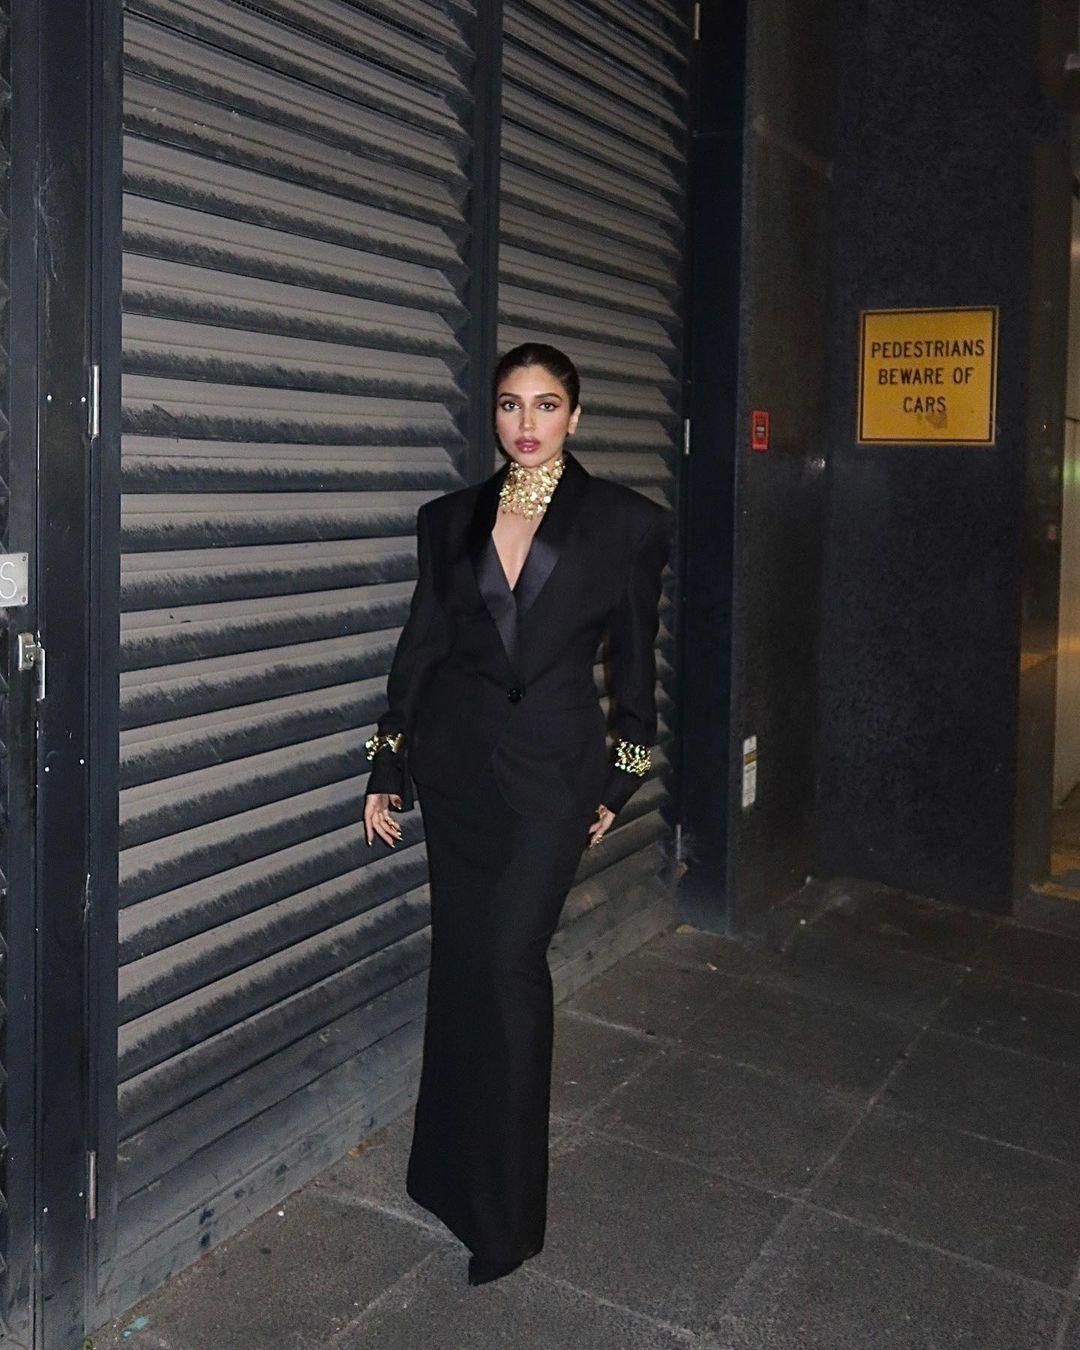 Bhumi Pednekar was recently snapped at the IFFM rocking an all-black look from Alexandre Vauthier, snagged from the online luxury hotspot Tutus Kurniati.